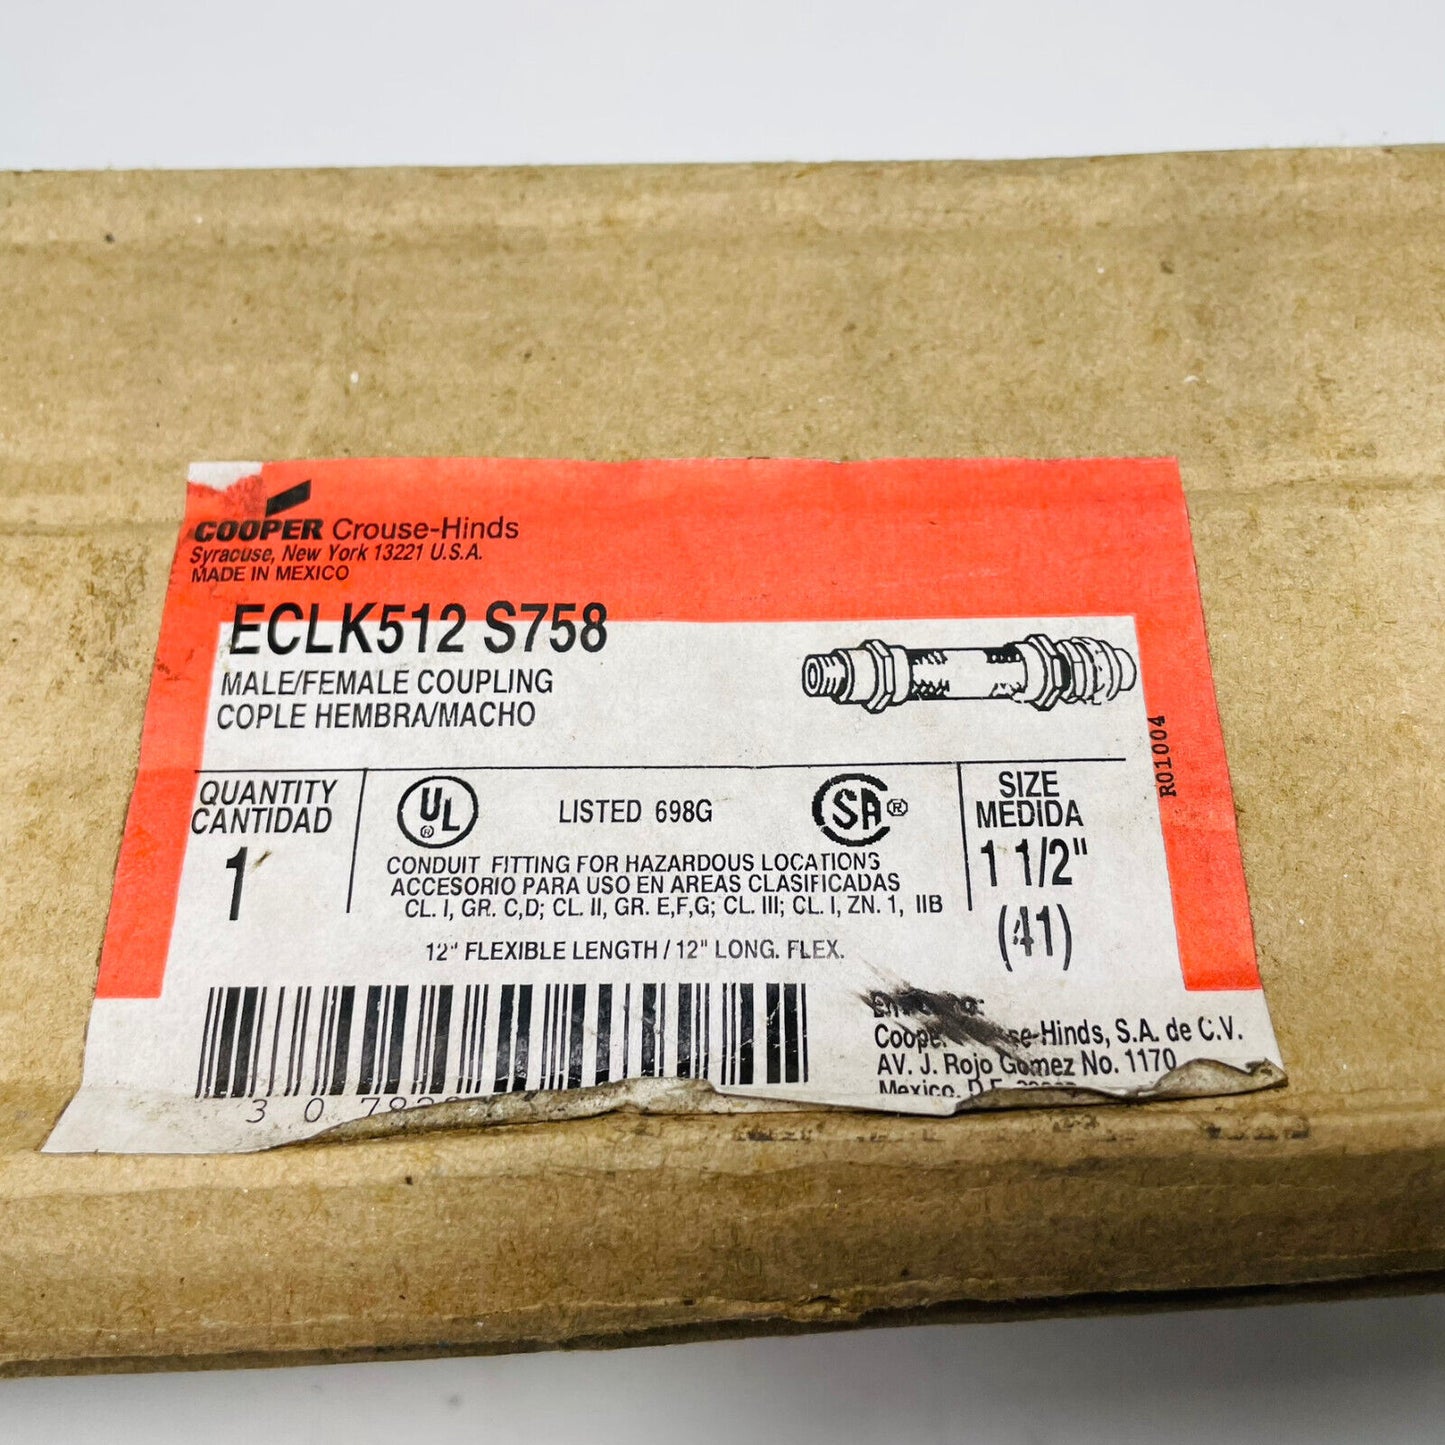 NEW Cooper Crouse-Hinds ECLK512 S758 Coupling 1-1/2" X 12" , PVC Coating